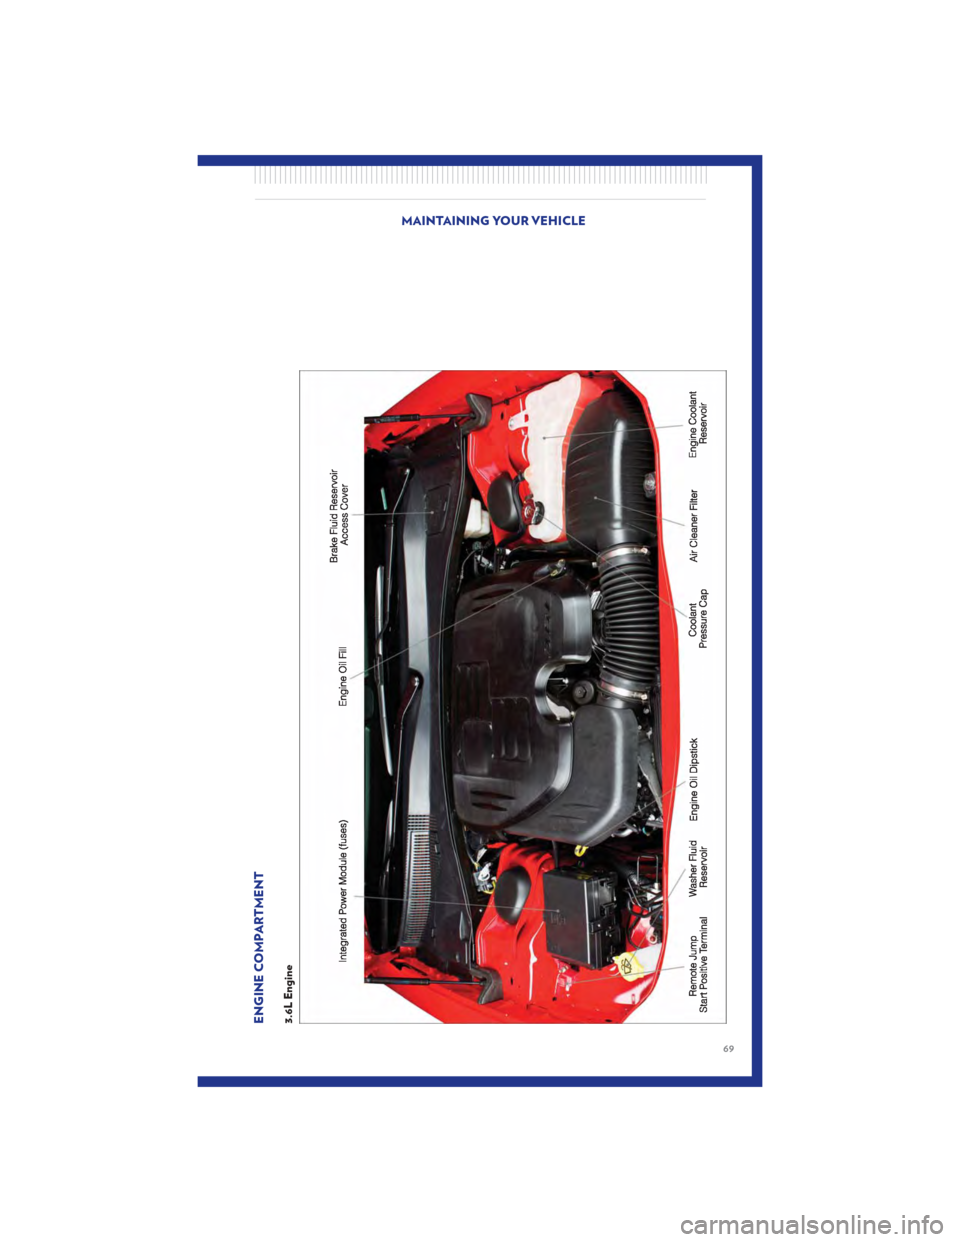 CHRYSLER 300 2011 2.G Manual PDF ENGINE COMPARTMENT3.6L Engine
MAINTAINING YOUR VEHICLE
69 